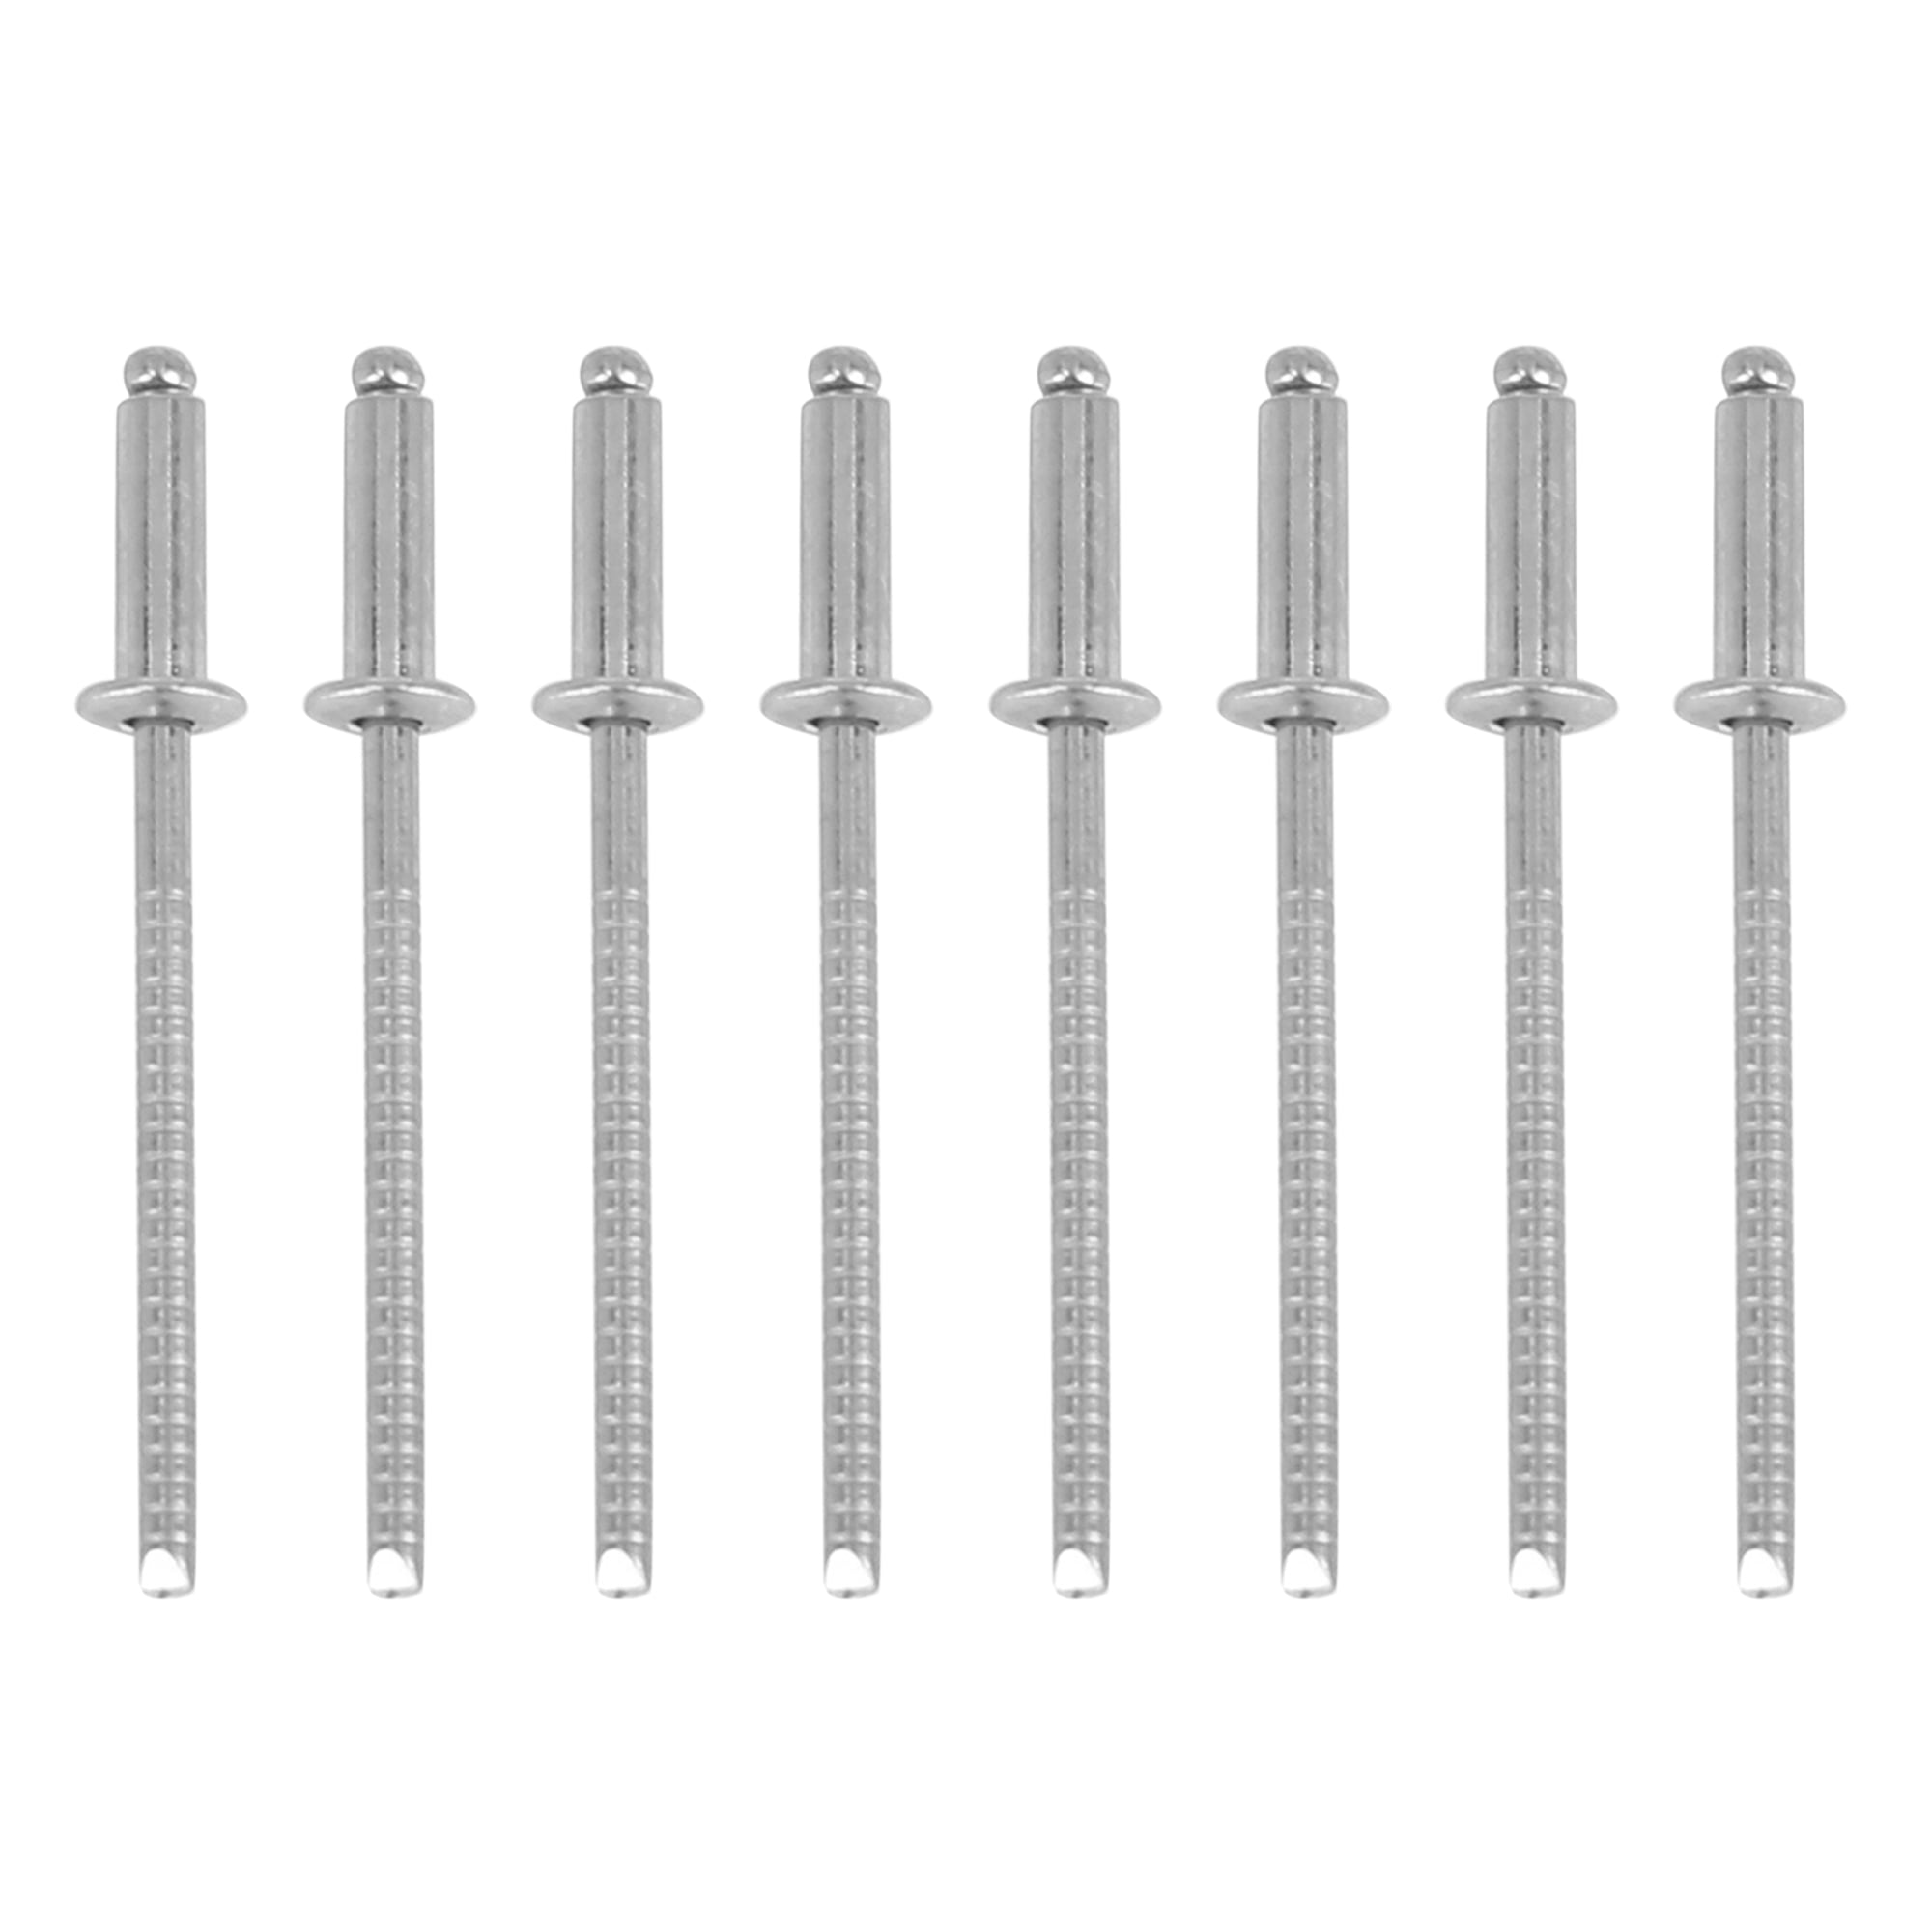 uxcell Blind Rivets 25pcs 304 Stainless Steel Pull Rivets Core Decoration Rivets 6.4mm Diameter 12mm Grip Length Silver Tone